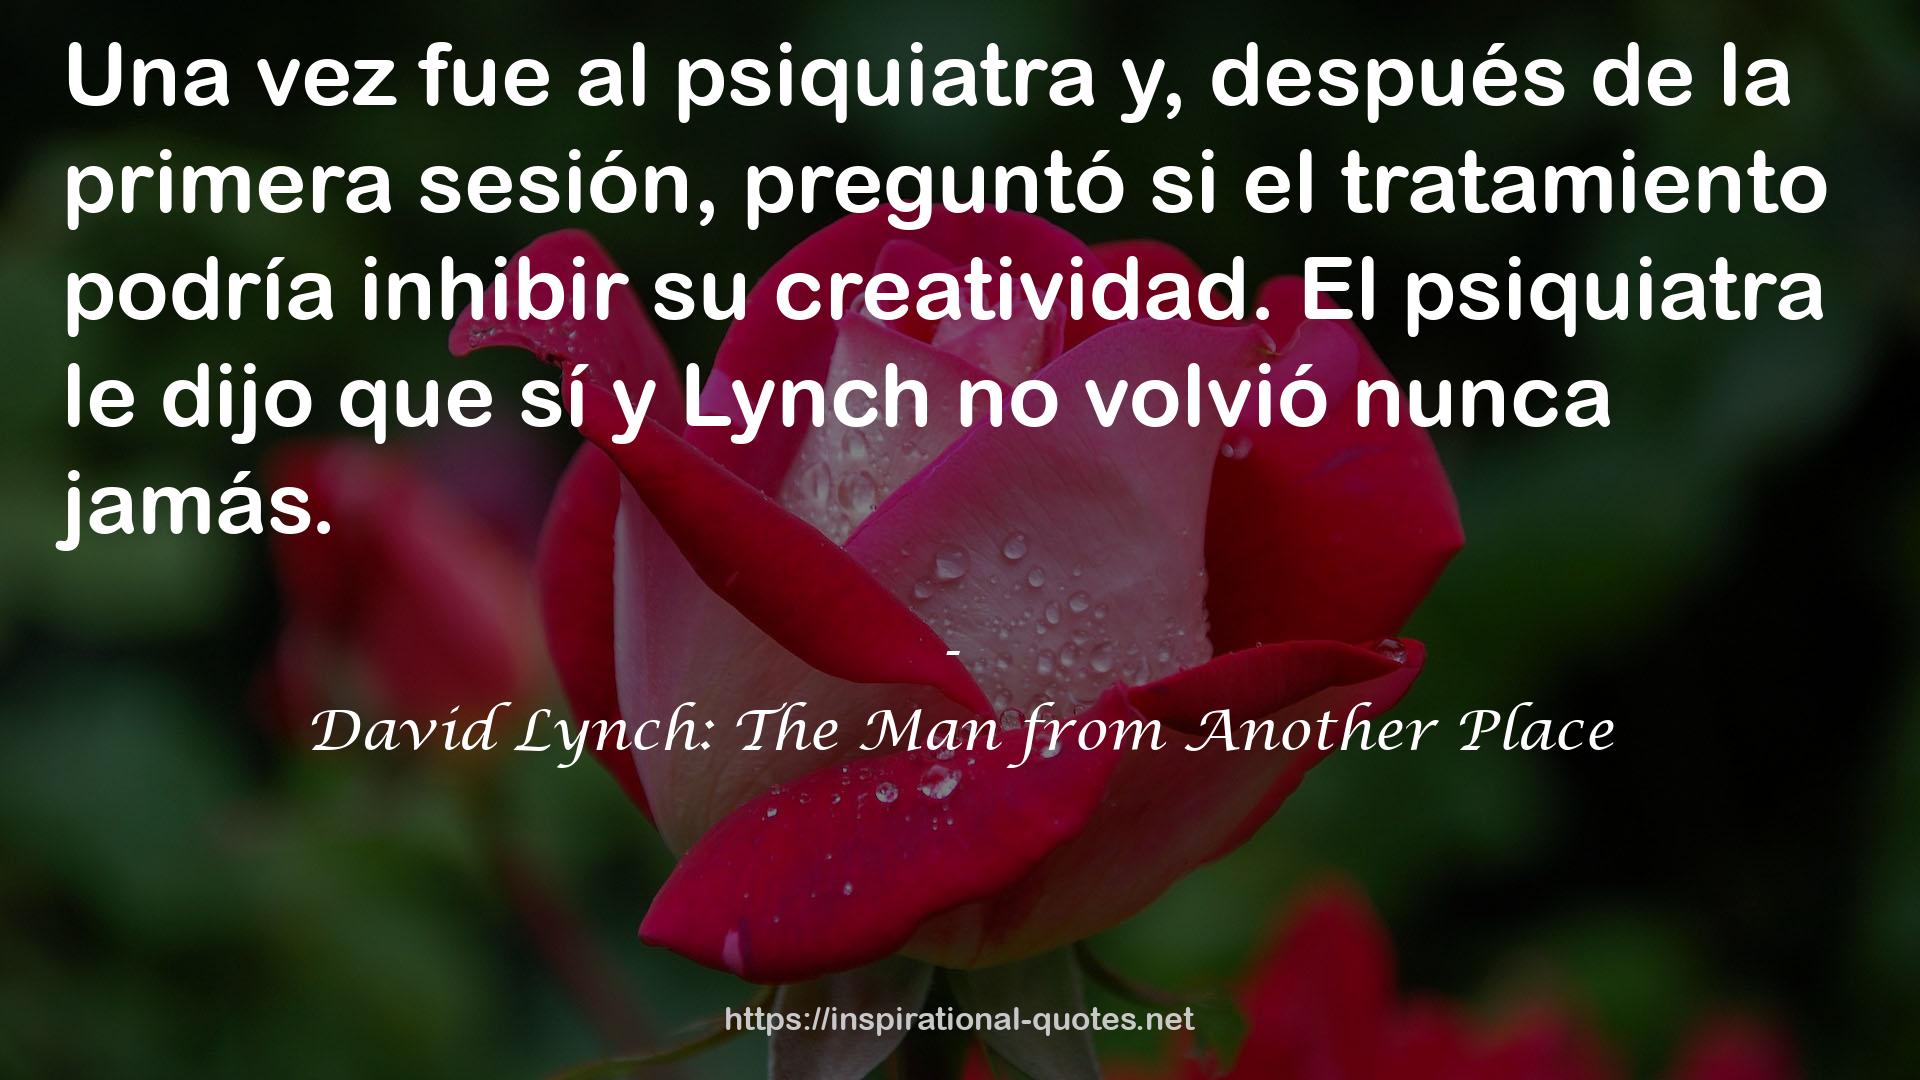 David Lynch: The Man from Another Place QUOTES